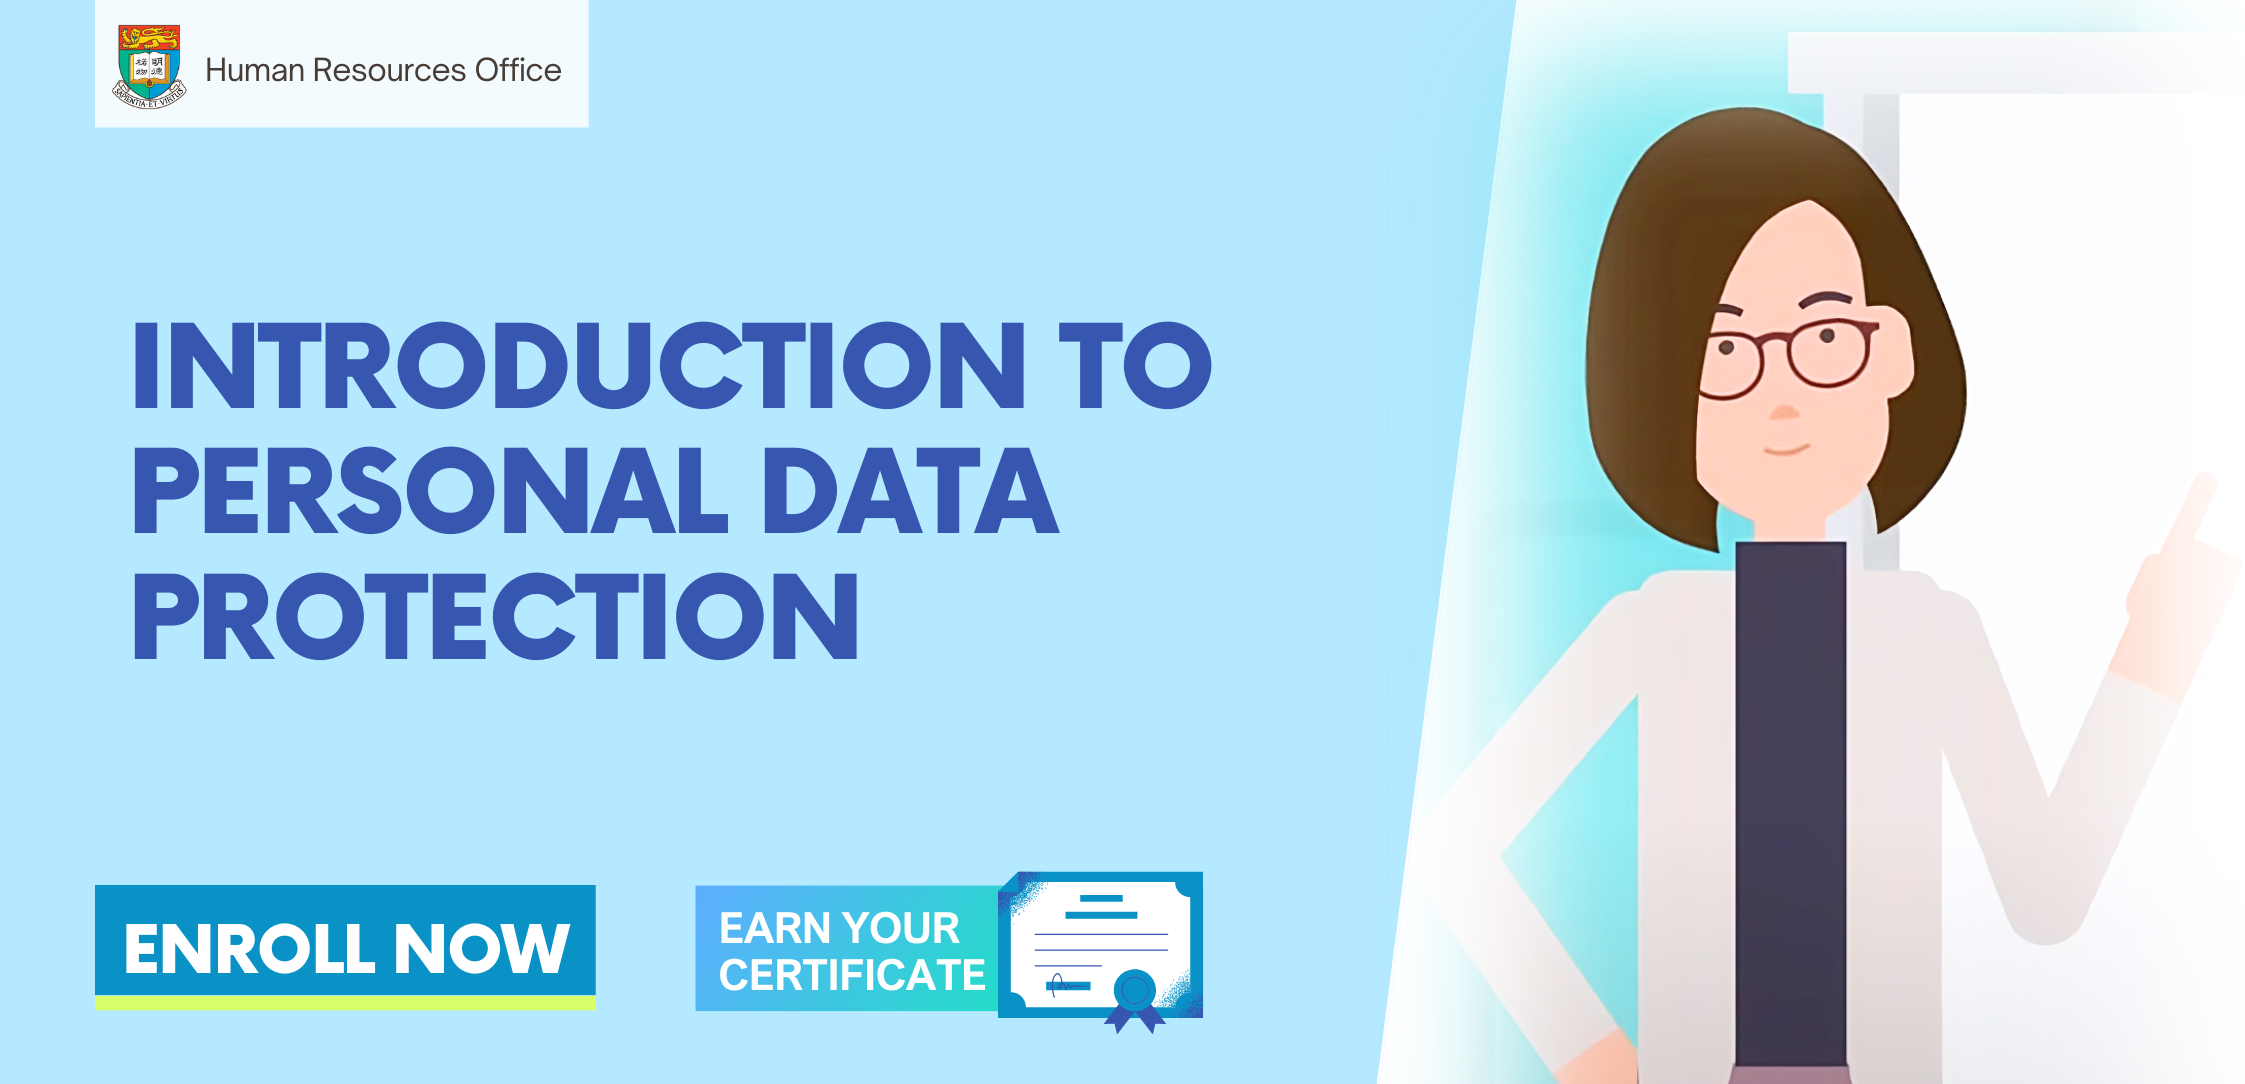 Introduction to Personal Data Protection HRO0001